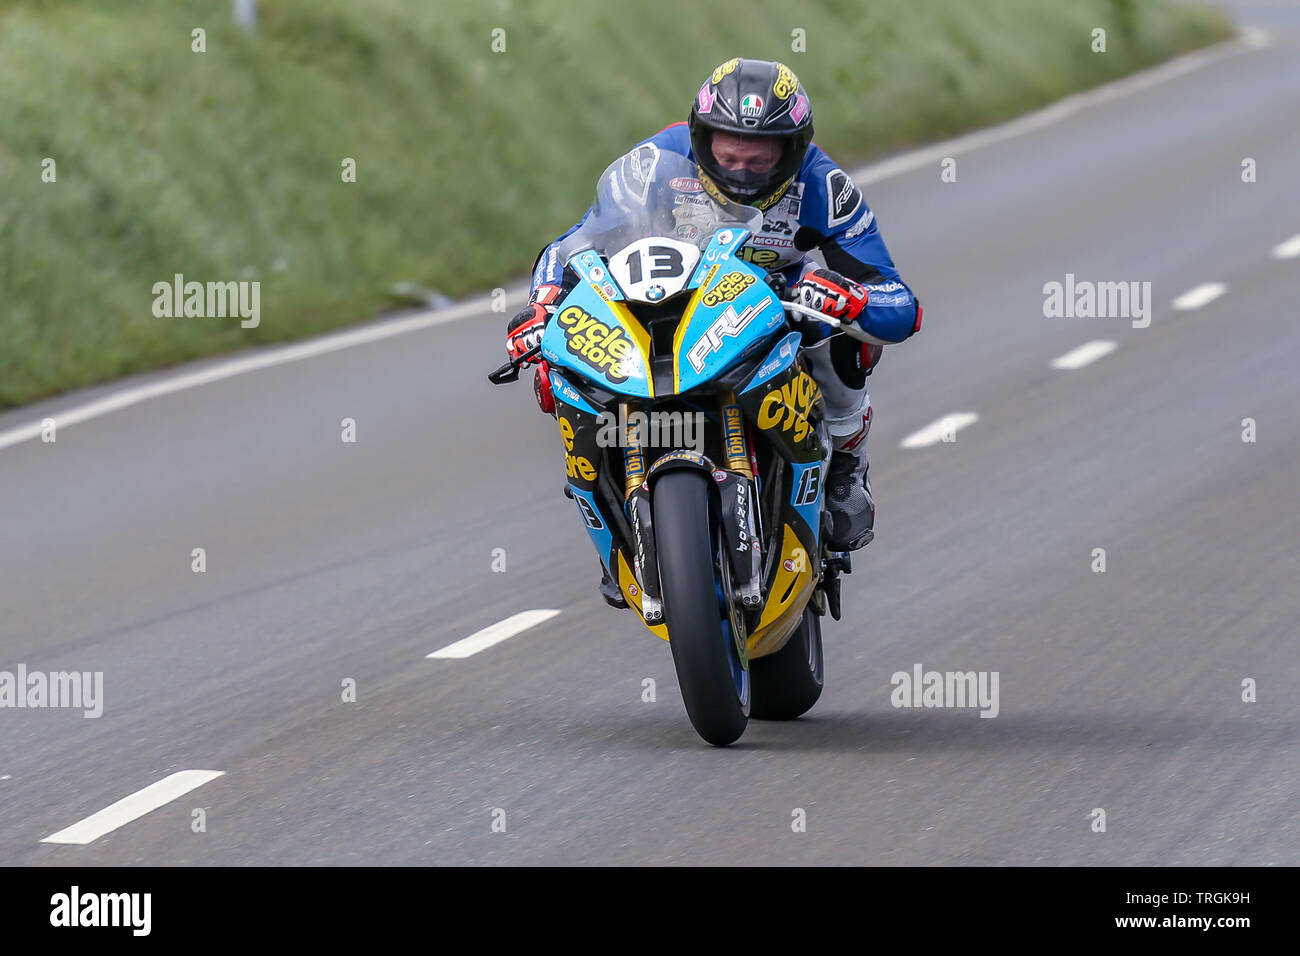 Sam West - PRL BMW in action in the Dunlop Senior TT class at Creg-ny-Baa during Qualifying at the 2019 Isle of Man TT (Tourist Trophy) Races, Fuelled Stock Photo